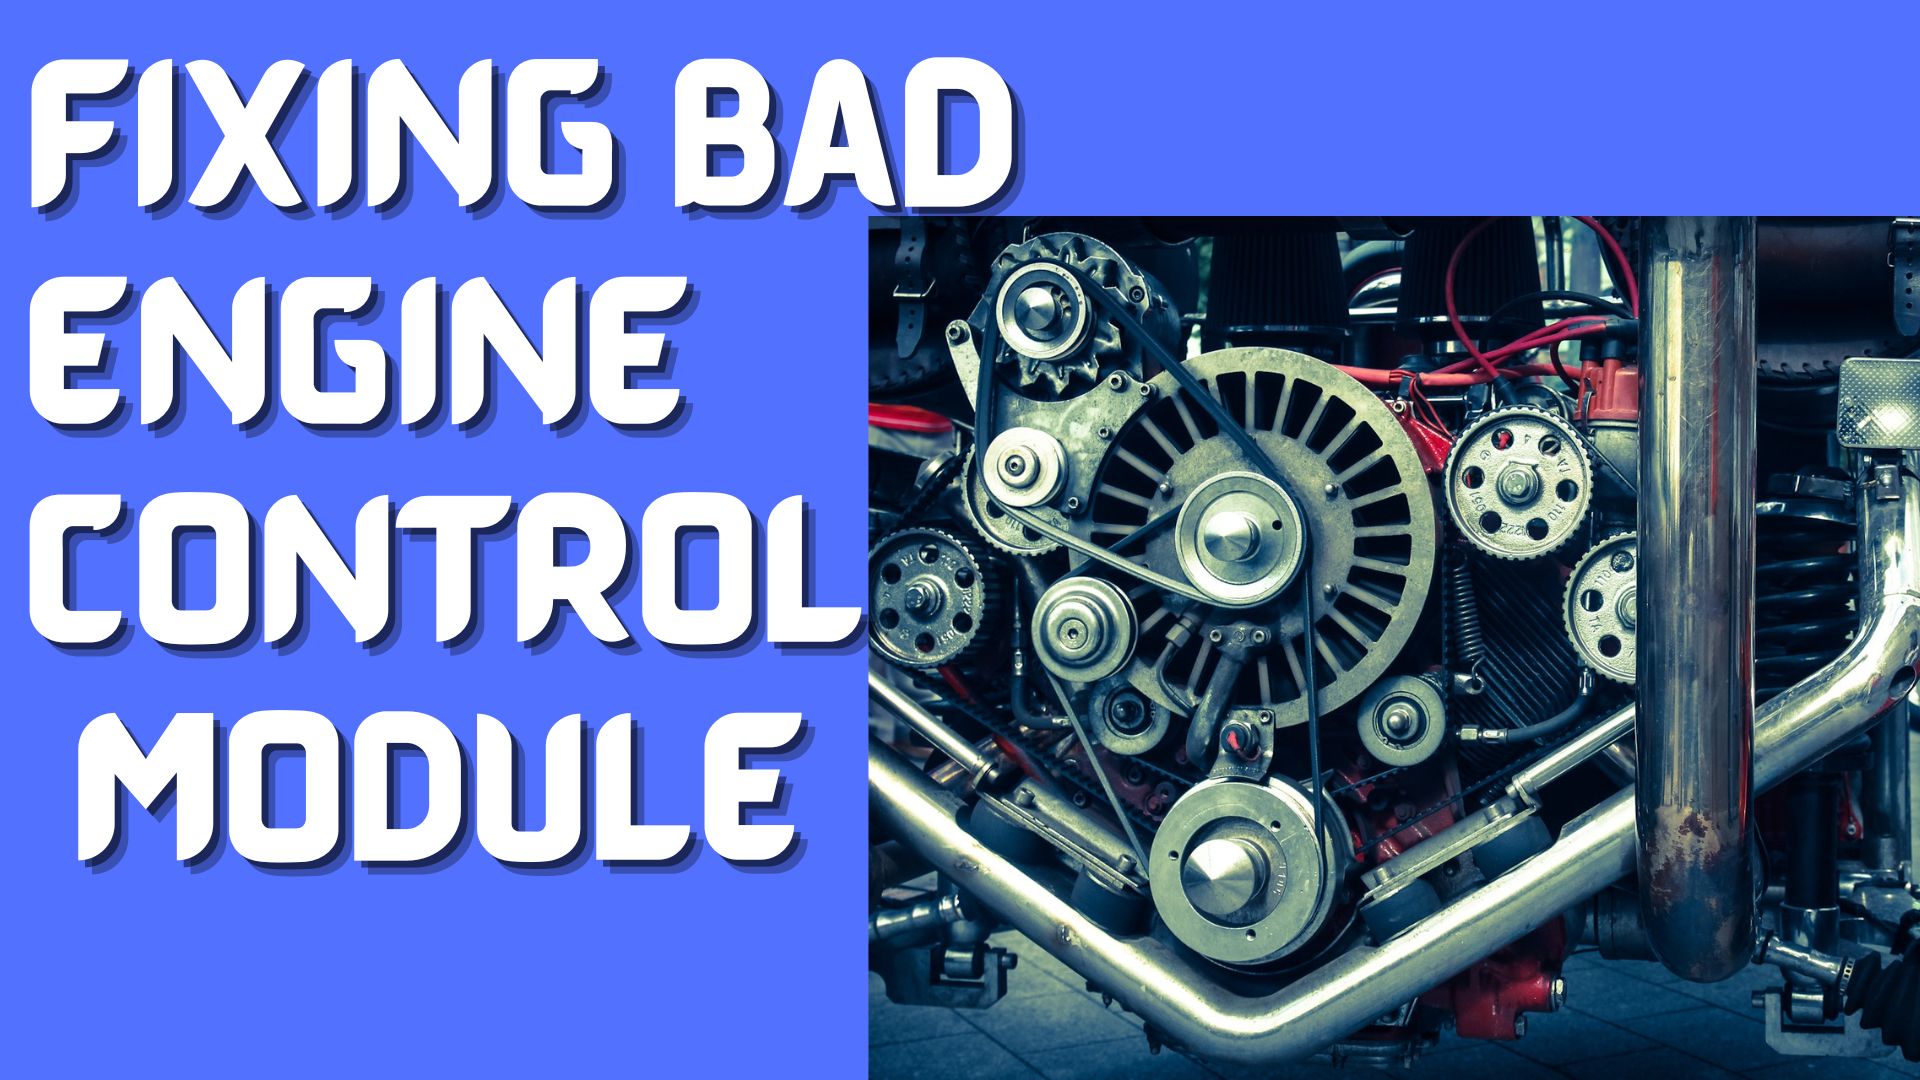 Signs of Bad Engine Control Module In A Truck